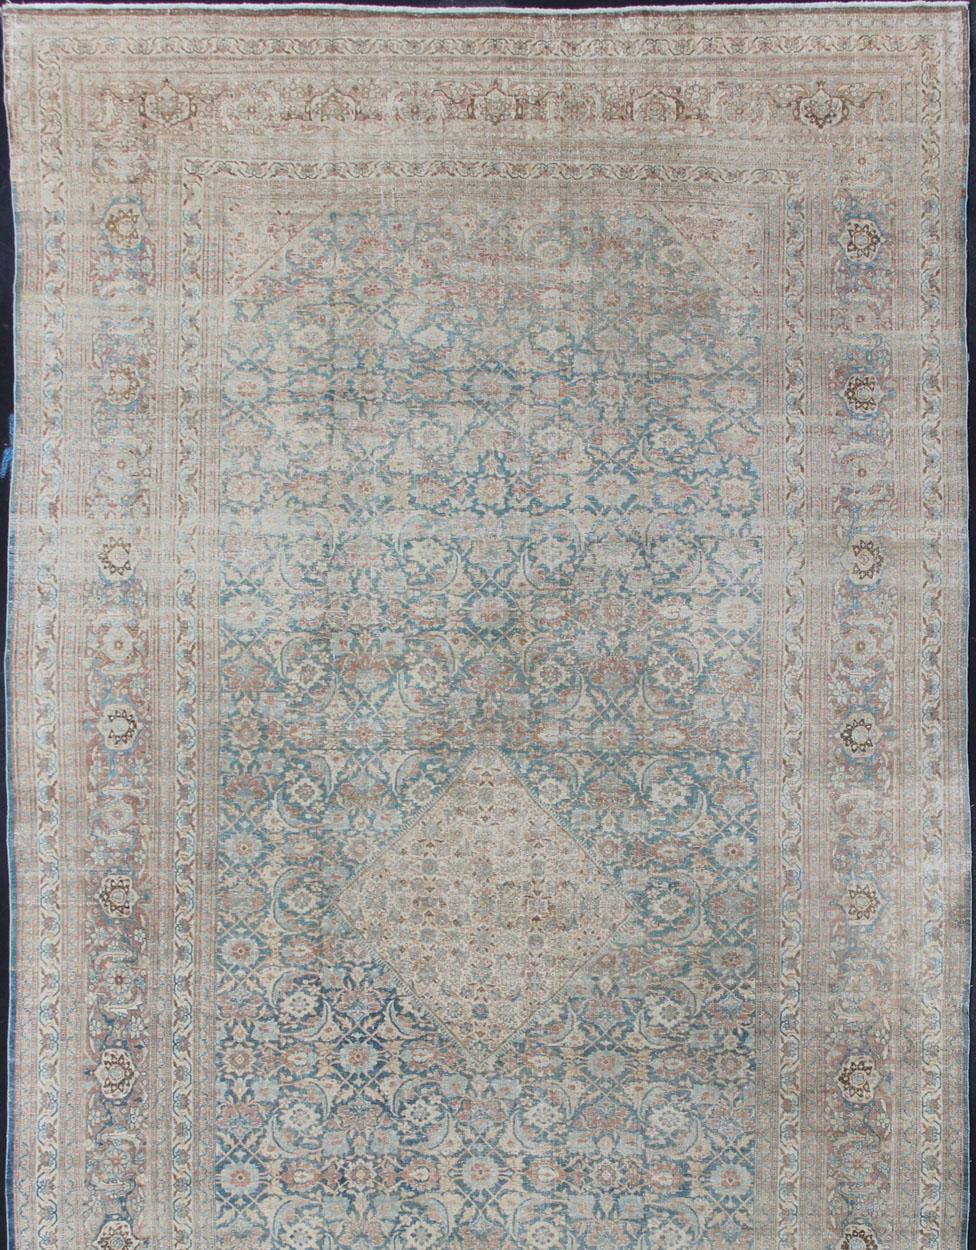 Cream, blue, charcoal and light brown and blue antique Persian Tabriz rug with Sub-Geometric all over Herati design, rug / KB-NA-180425, country of origin / type: Iran / Mahal, circa 1920

Measures: 12' x 23'2 

This antique Persian medallion